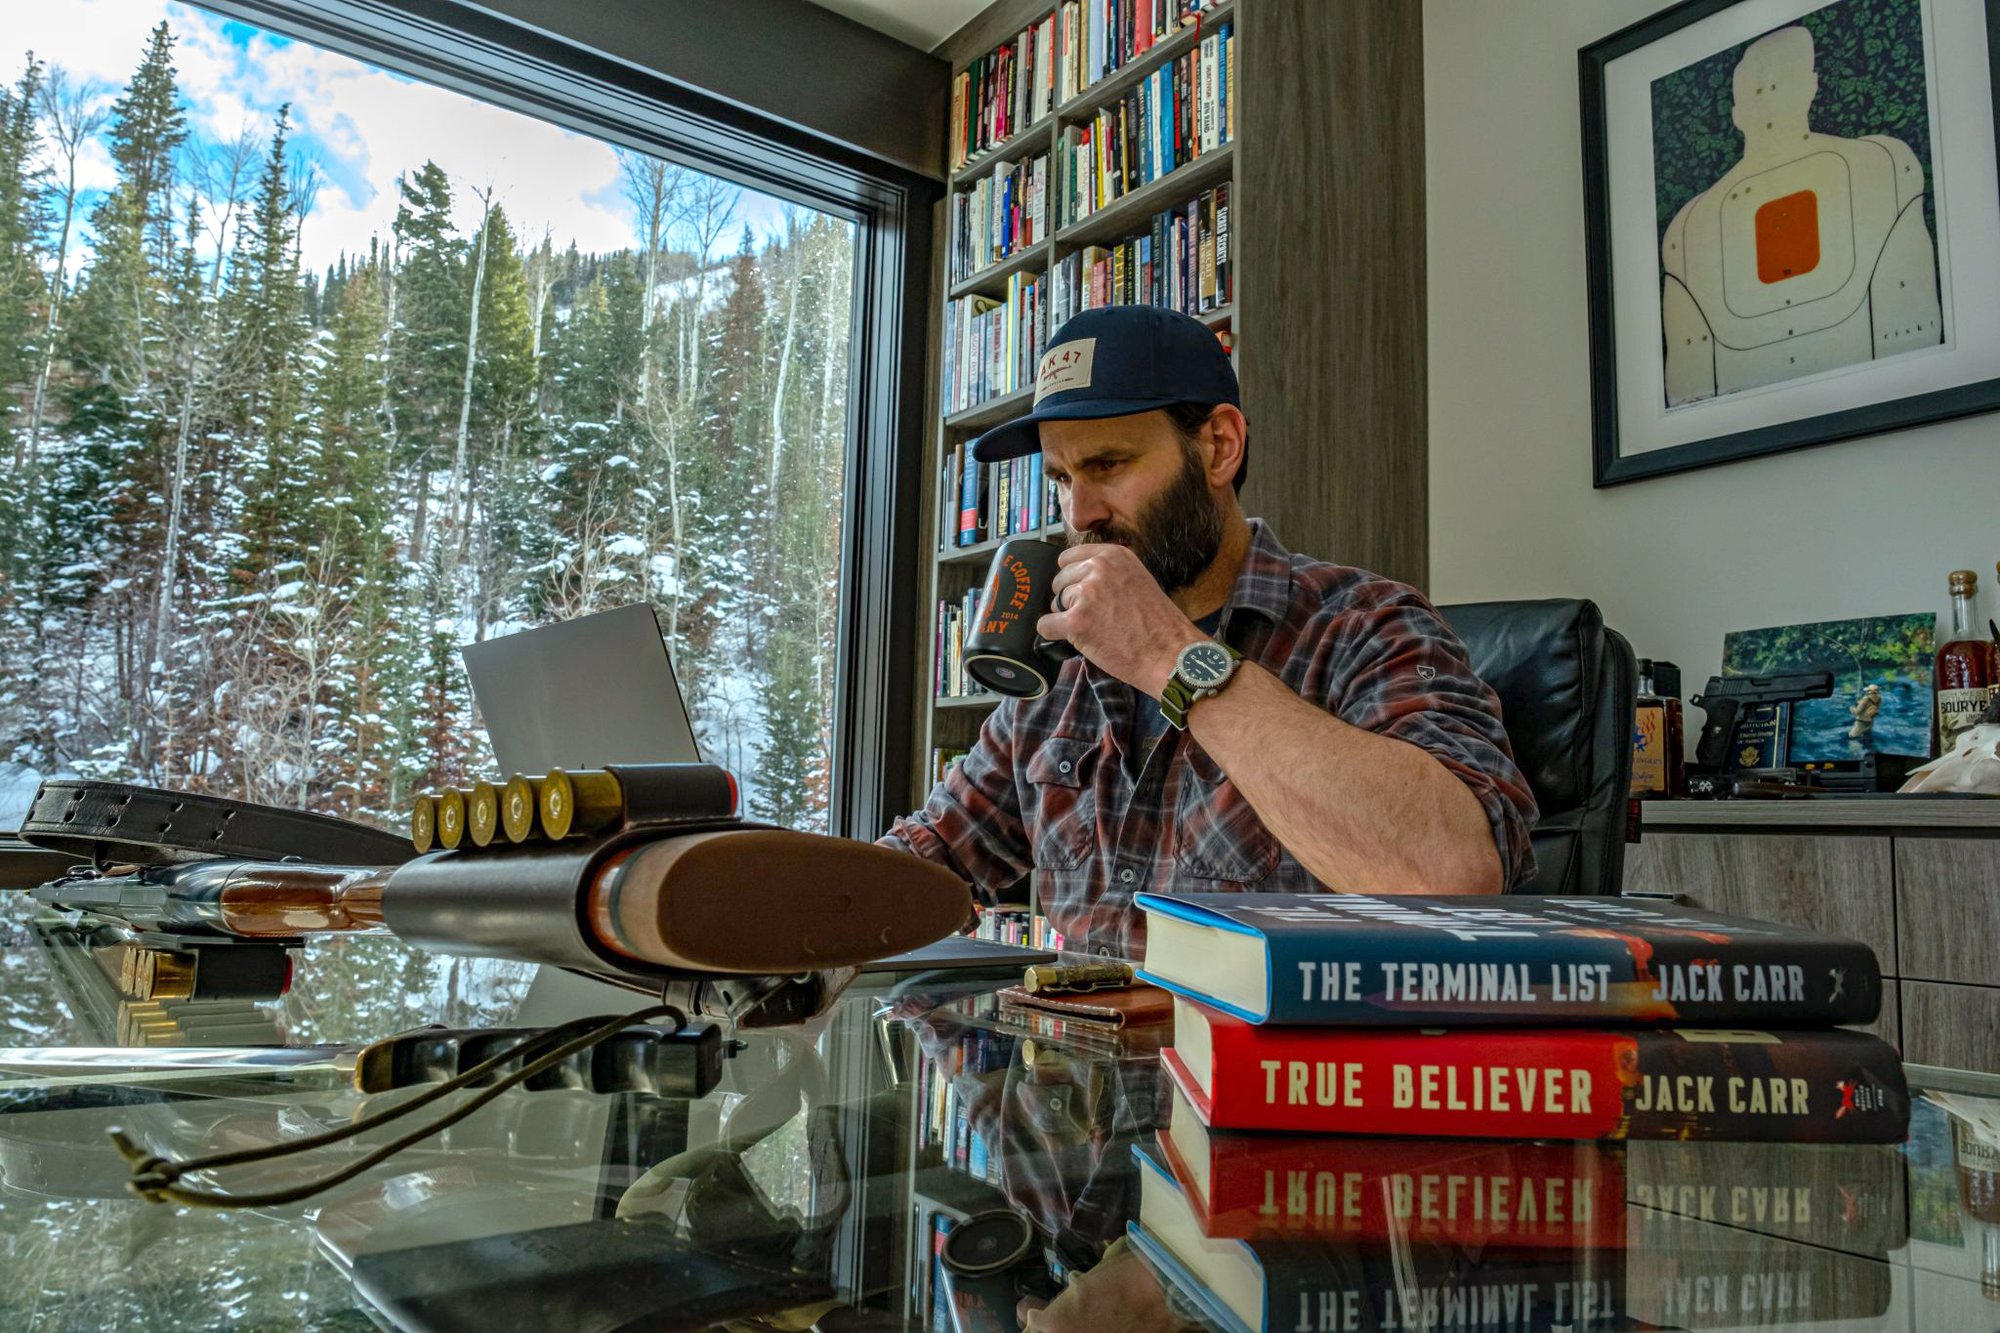 Jack Carr at work. Photo courtesy of Black Rifle Coffee Company.